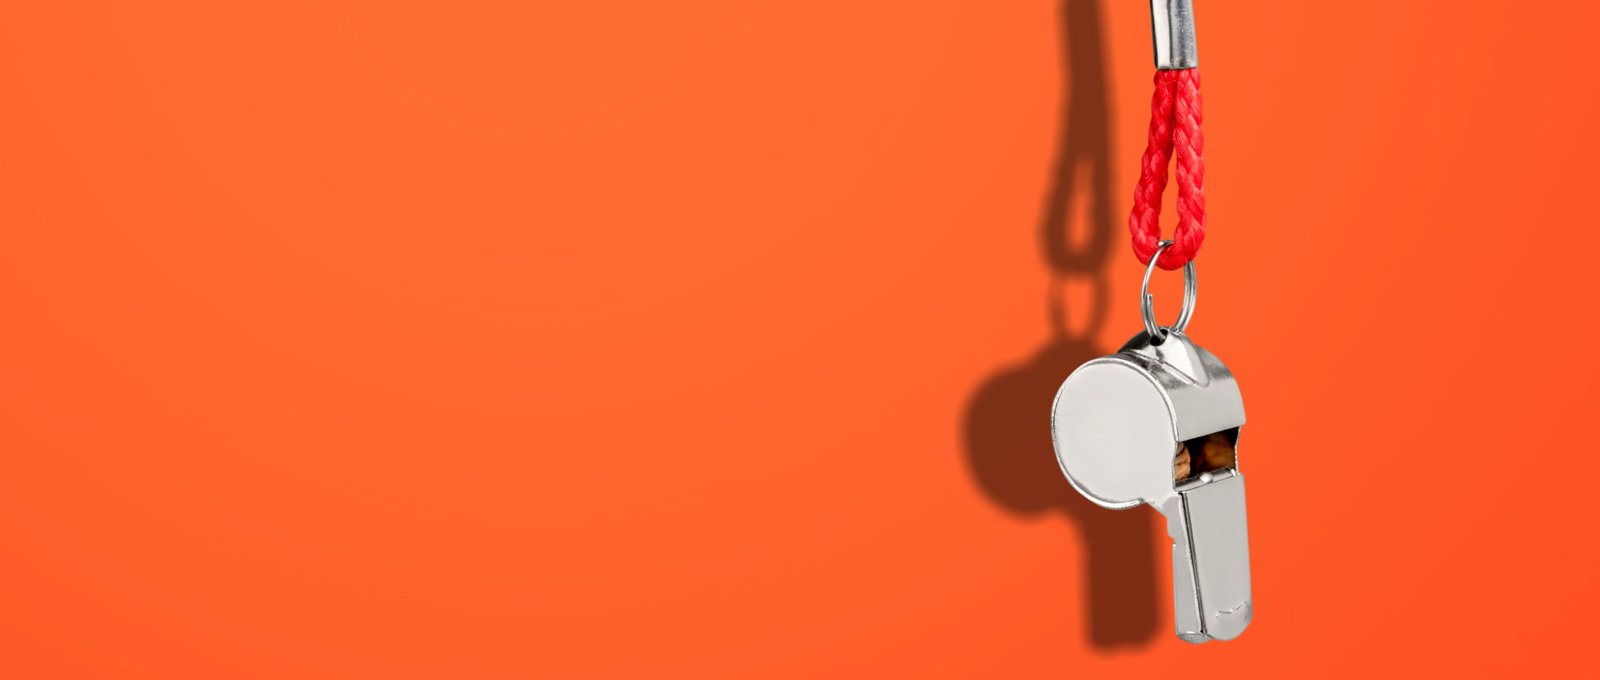 A metal whistle dangling on a red cord in front of a red background